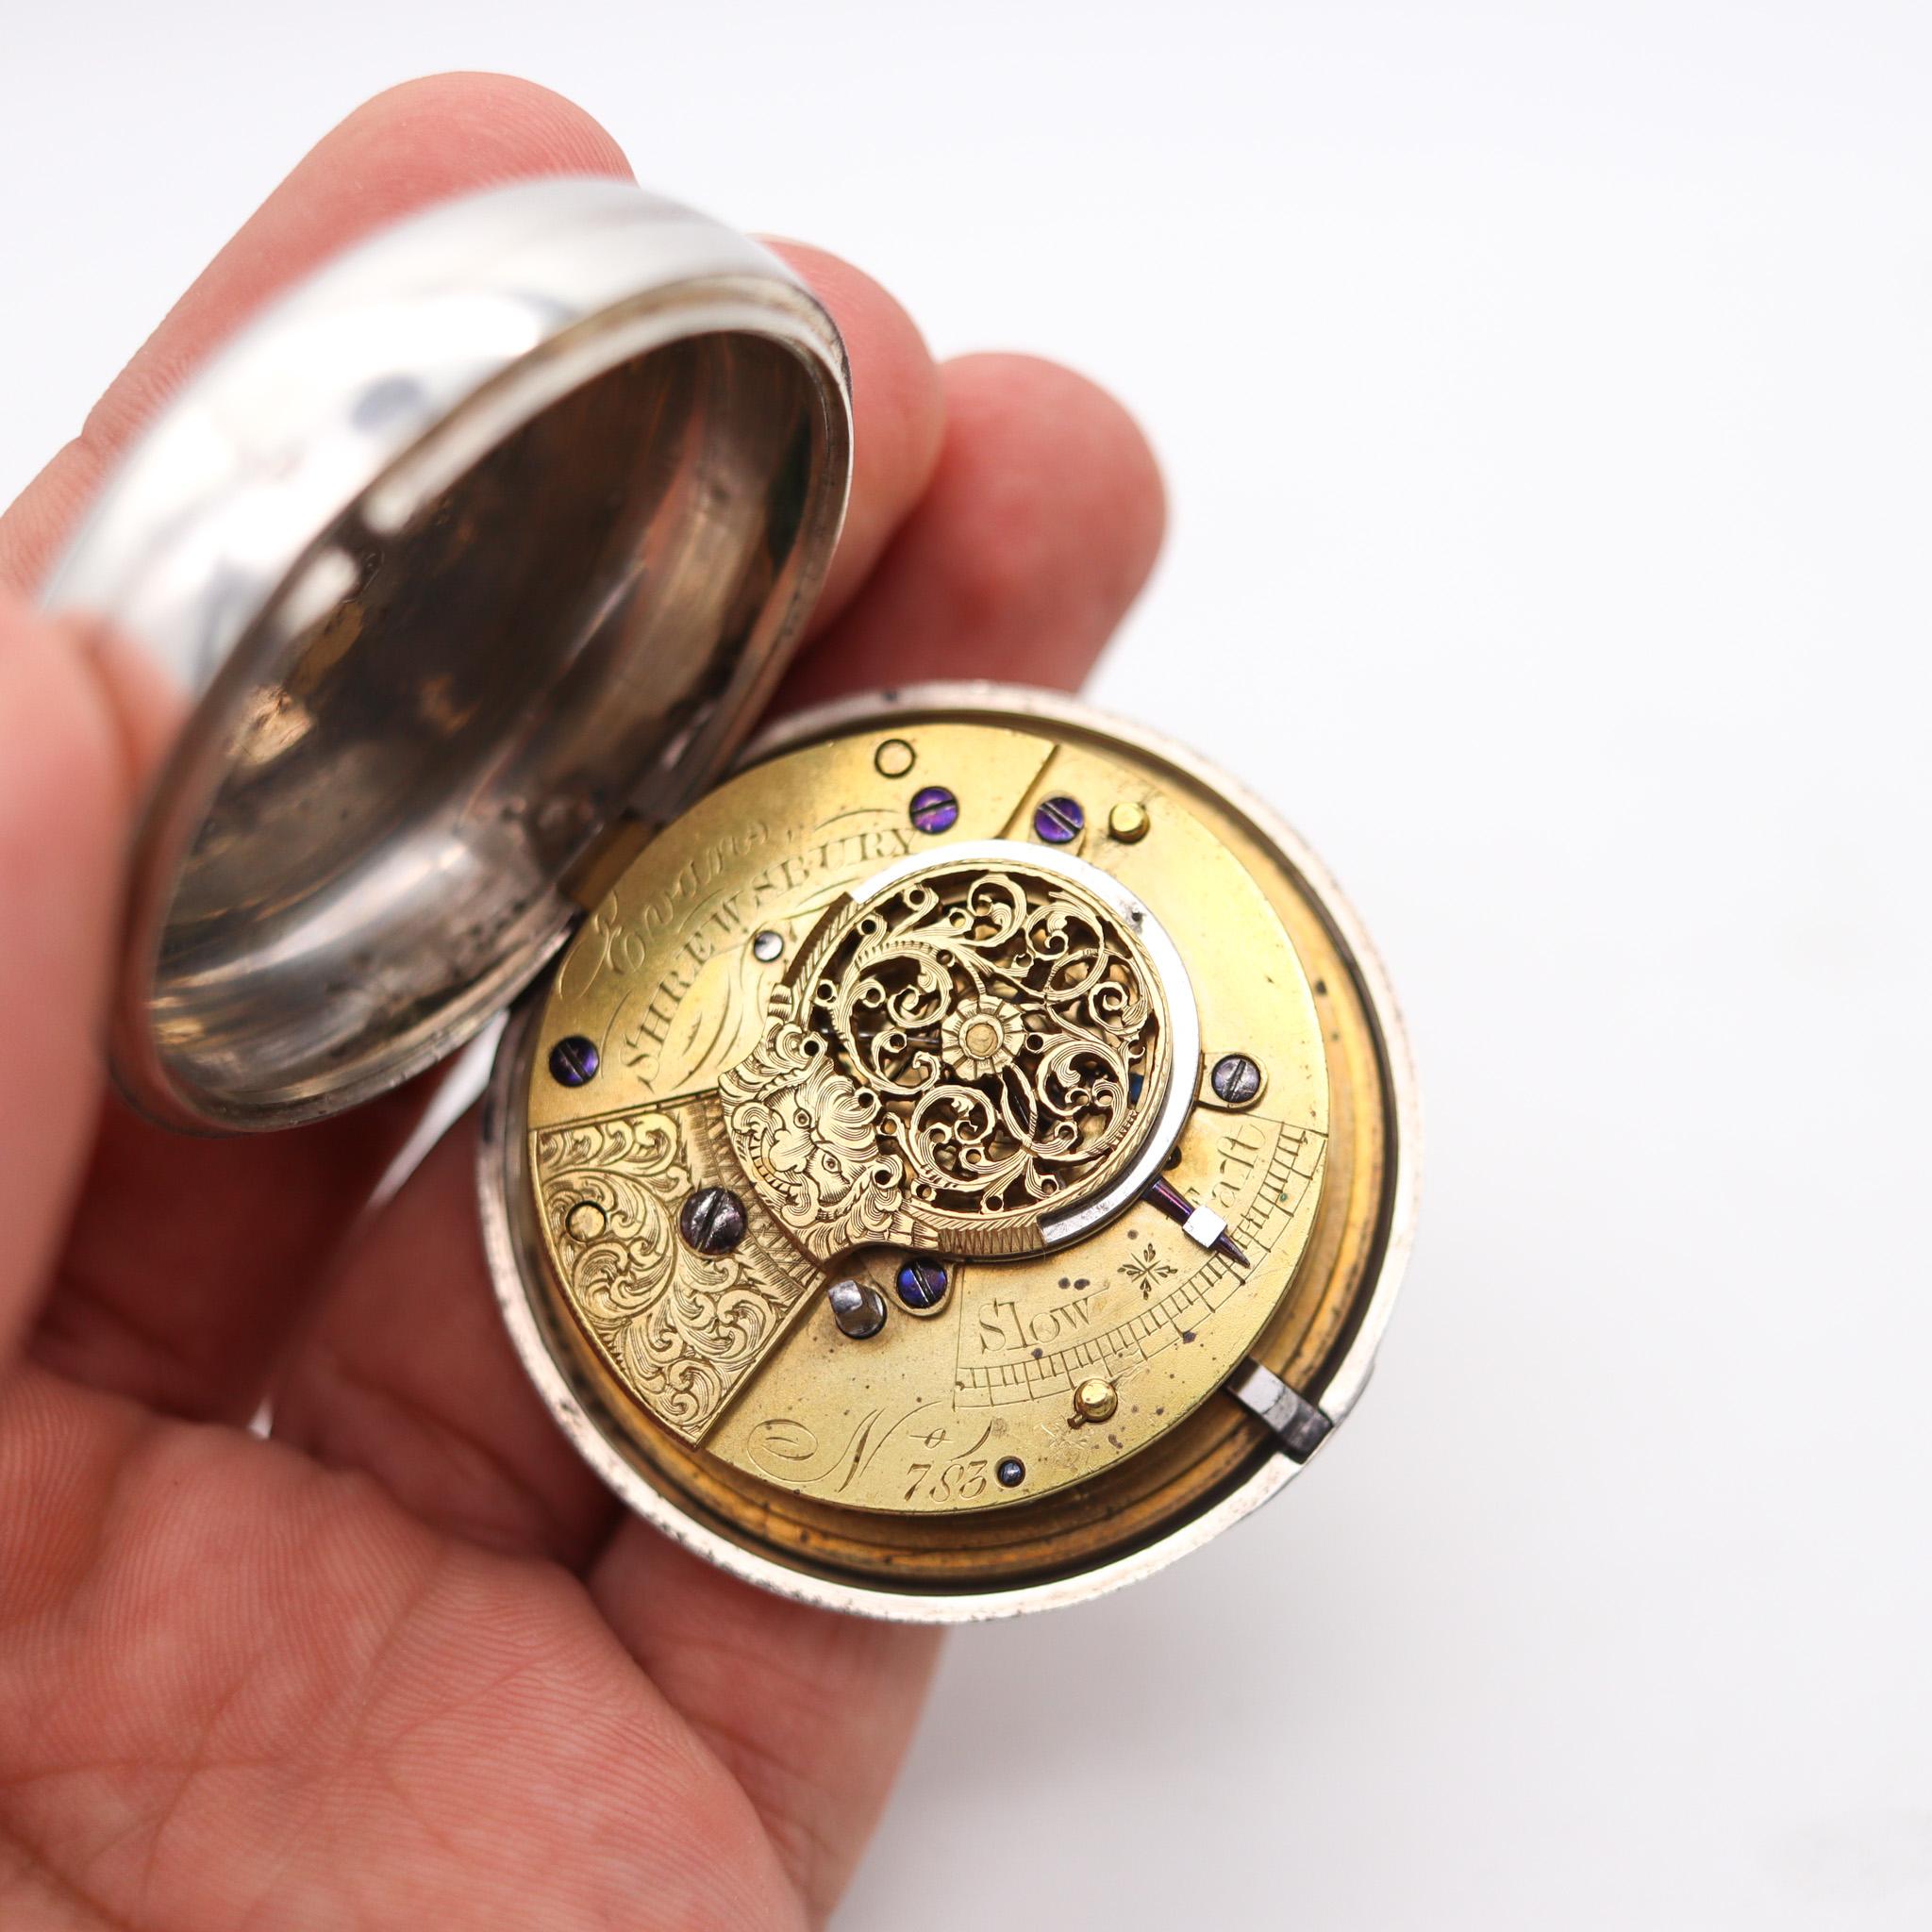 A hunter pocket watch made by Rich Evans Shrewsbury and Robert Causer.

Very fine half hunter pair cased pocket clock, made in Birmingham England by the silversmith Robert Causer and the clockmaker Evans Shrewsbury. The cases were made in 1856, in